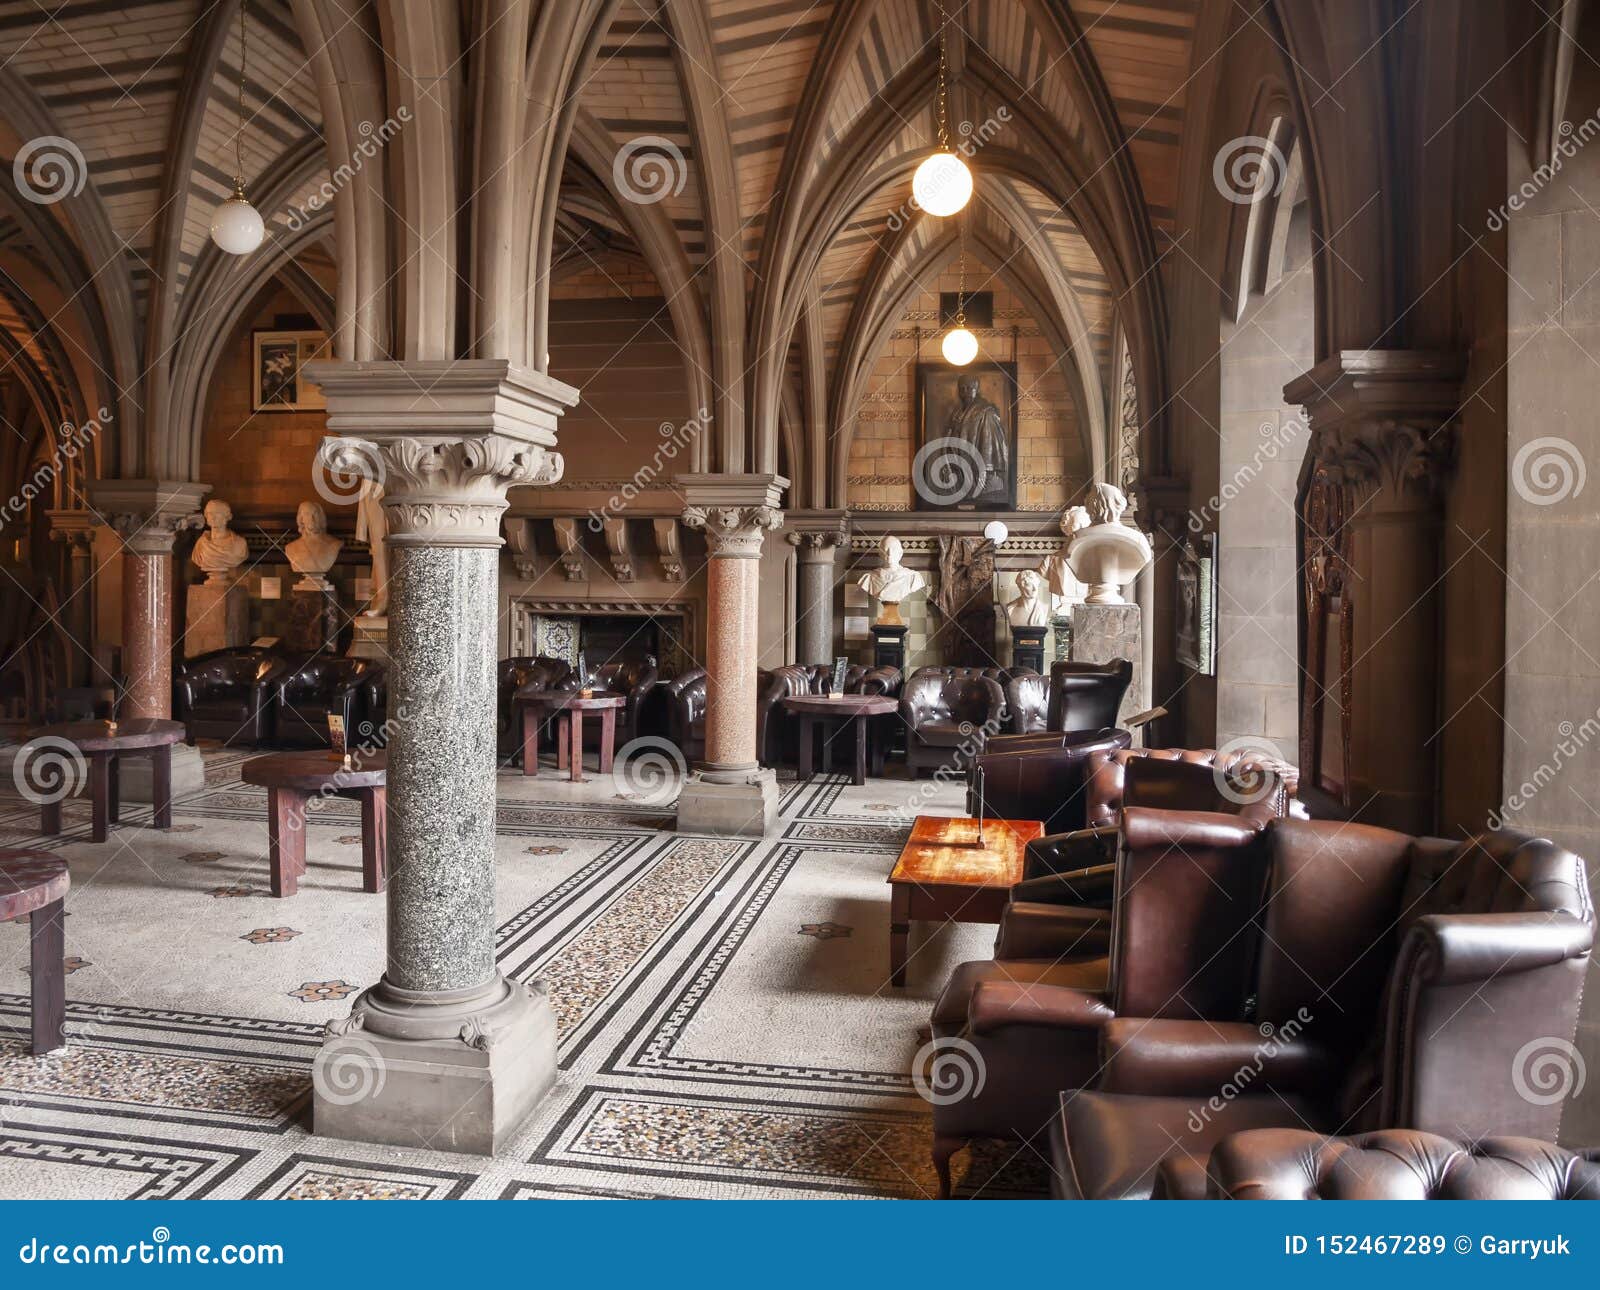 An Interior Shot Of The Sitting Area Of Manchester Town Hall